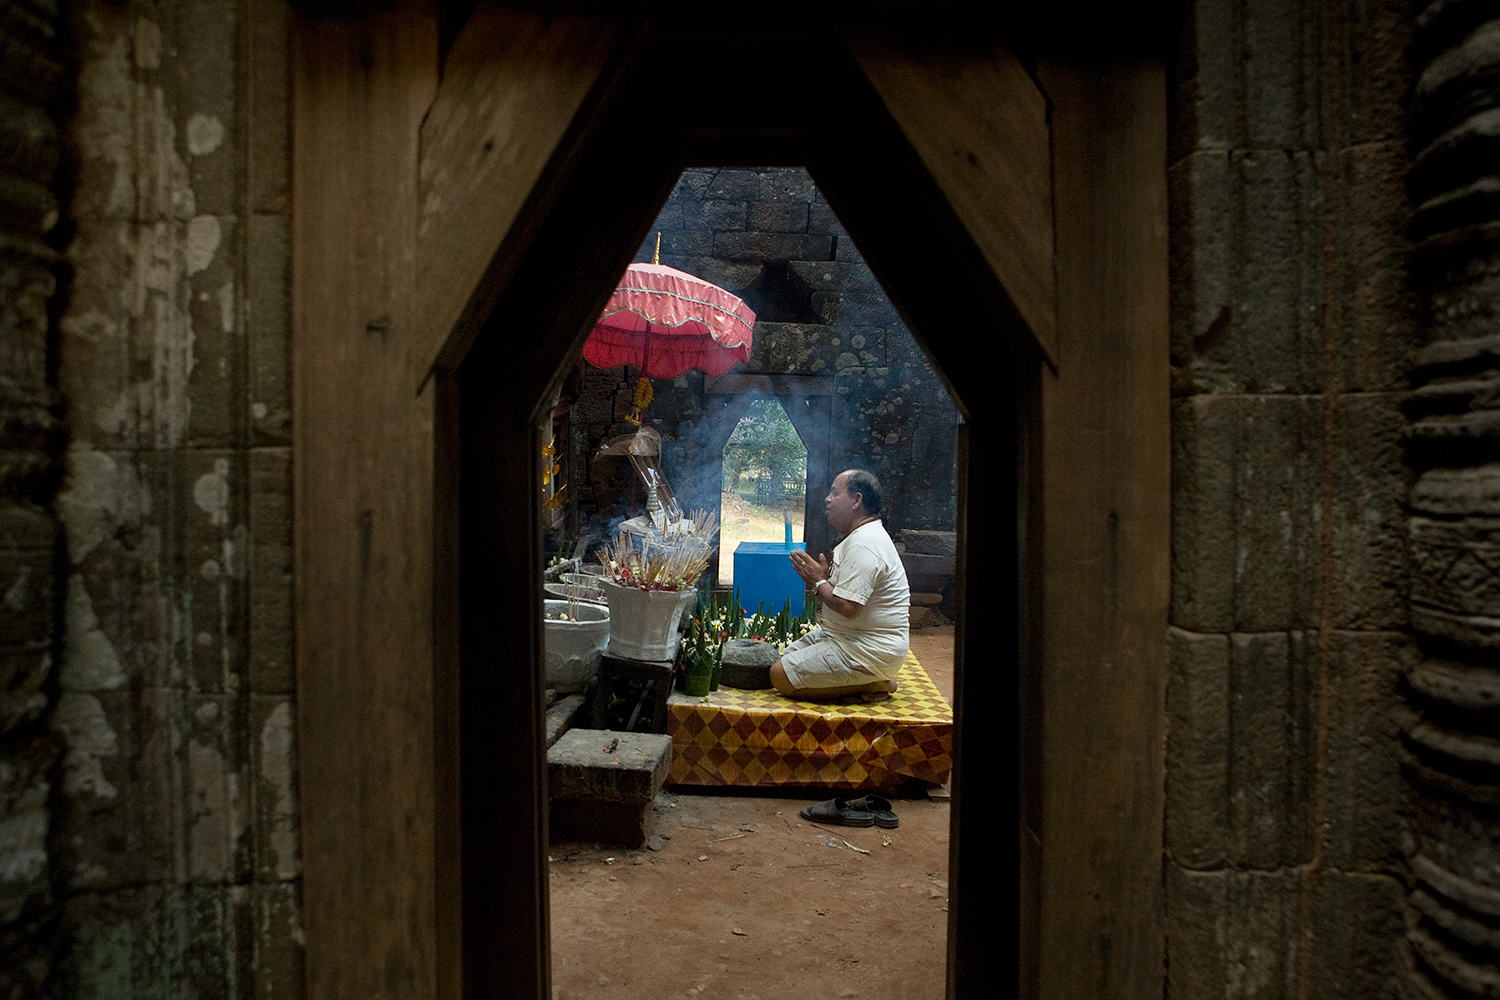  A lay Buddhist lights incense and leaves an offering at the ancient shrine Wat Phu Champasak in Laos. 